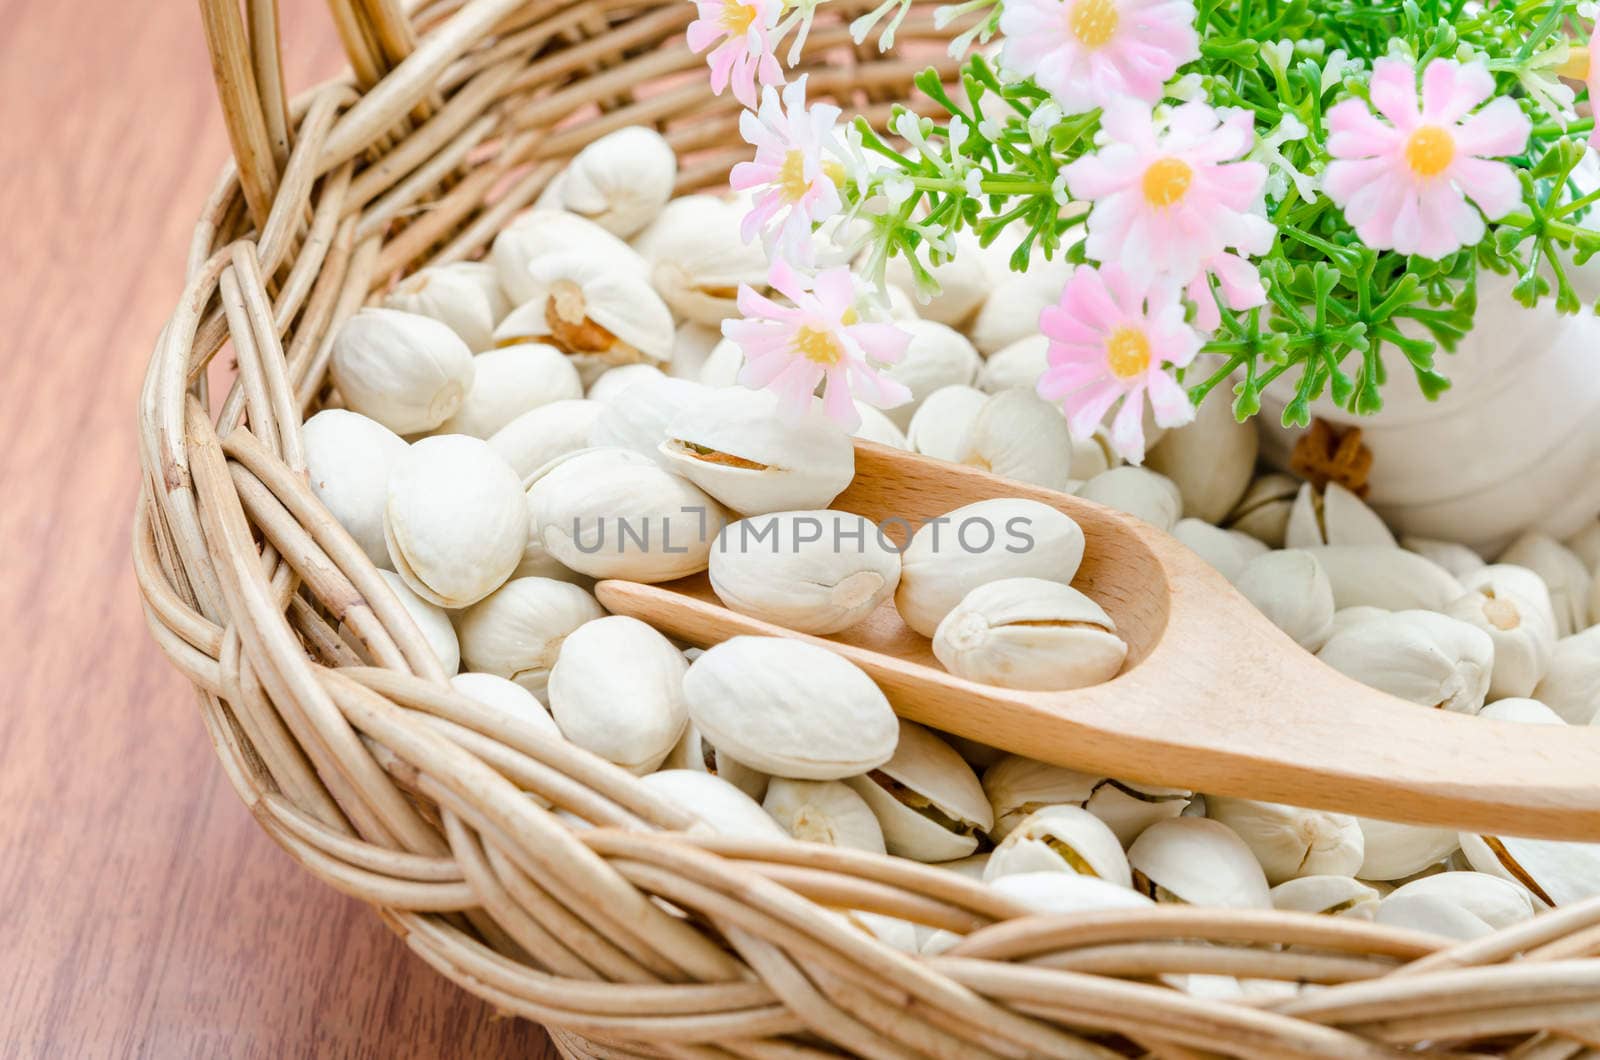 Pistachio nuts in wood basket and woo spoon with flower on wood background.